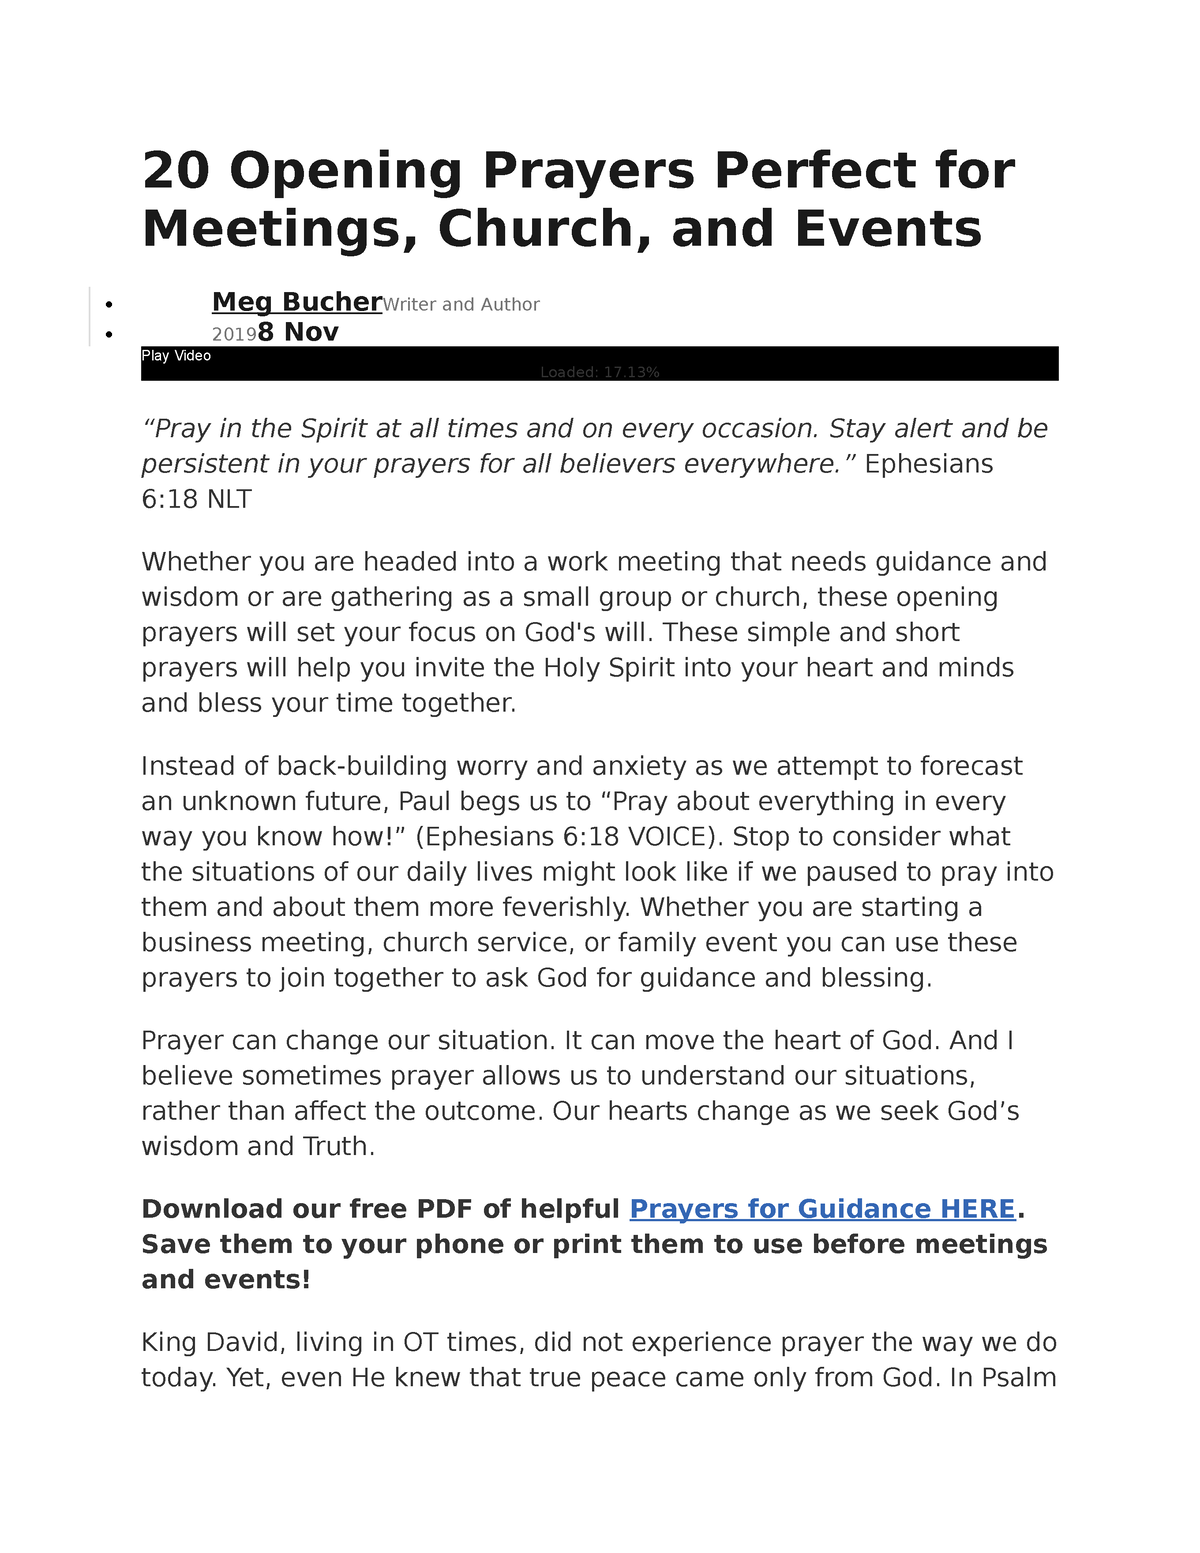 20 Opening Prayers Perfect for Meetings - Stay alert and be persistent ...